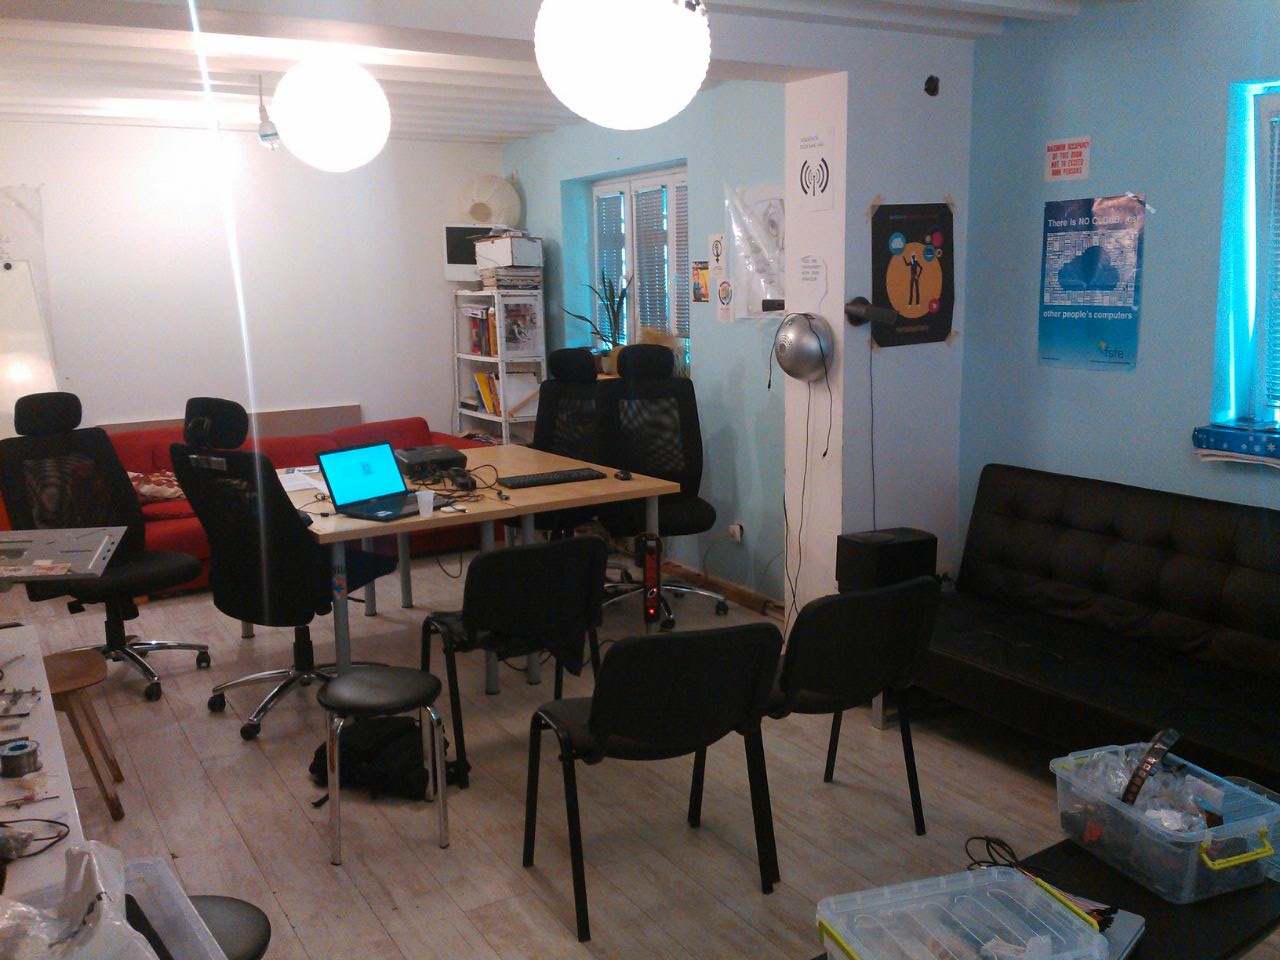 Main room of the hacklab